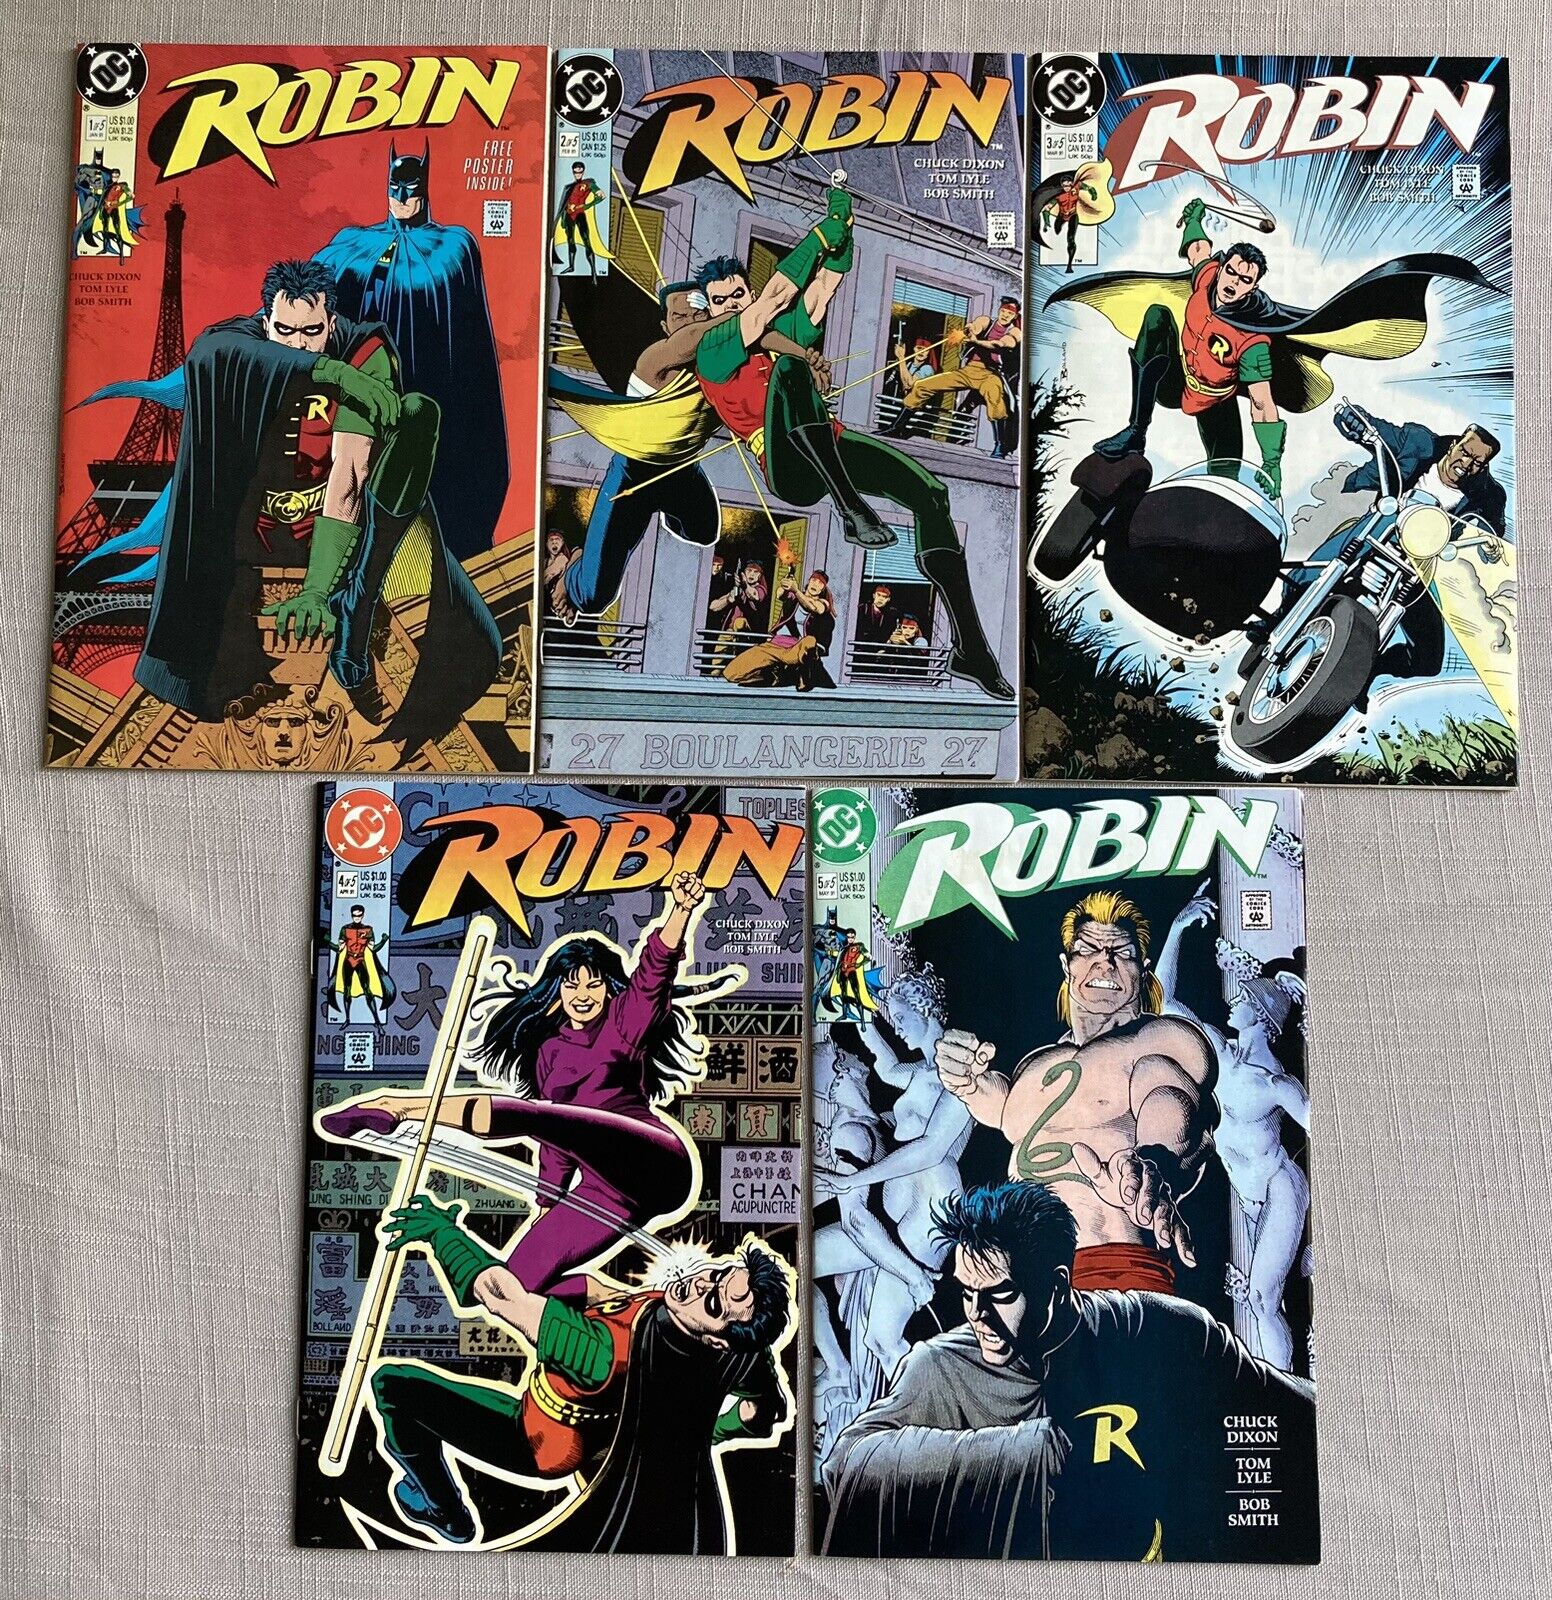 Robin (1990 DC) #1-5 Complete Limited Series - Time Drake